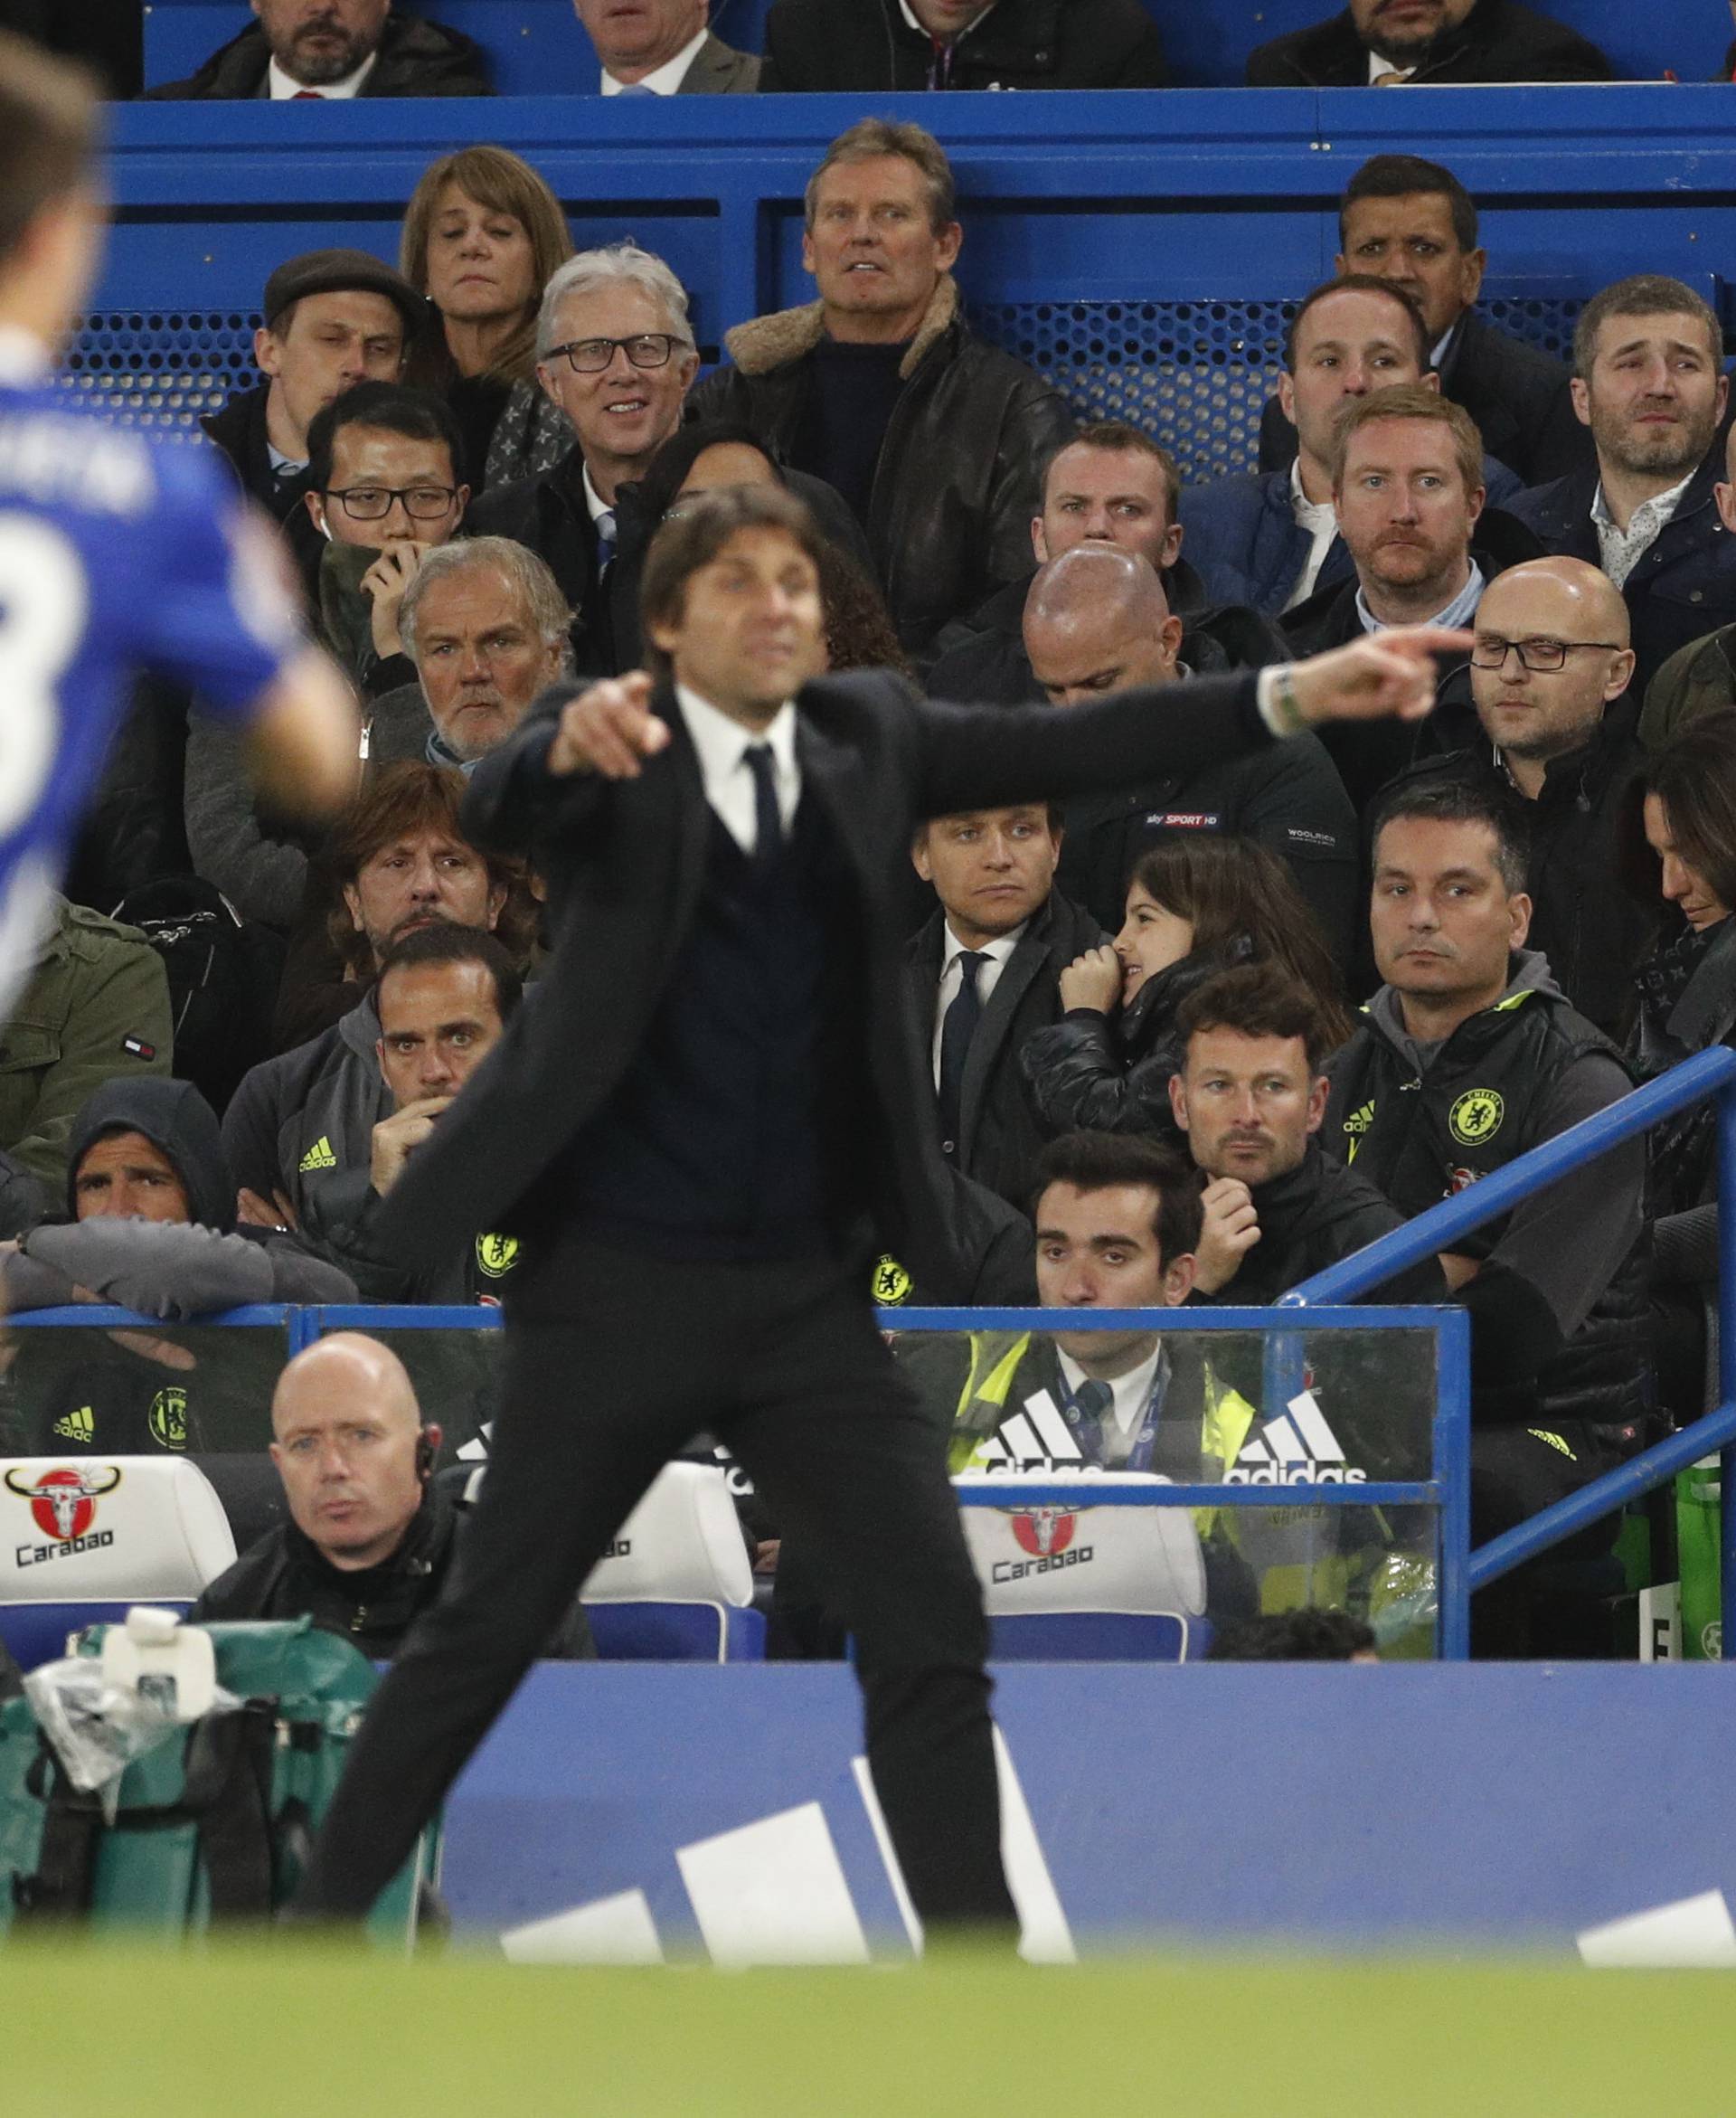 Wife of Chelsea manager Antonio Conte, Elisabetta Muscarello and daughter Vittoria sat in the stands